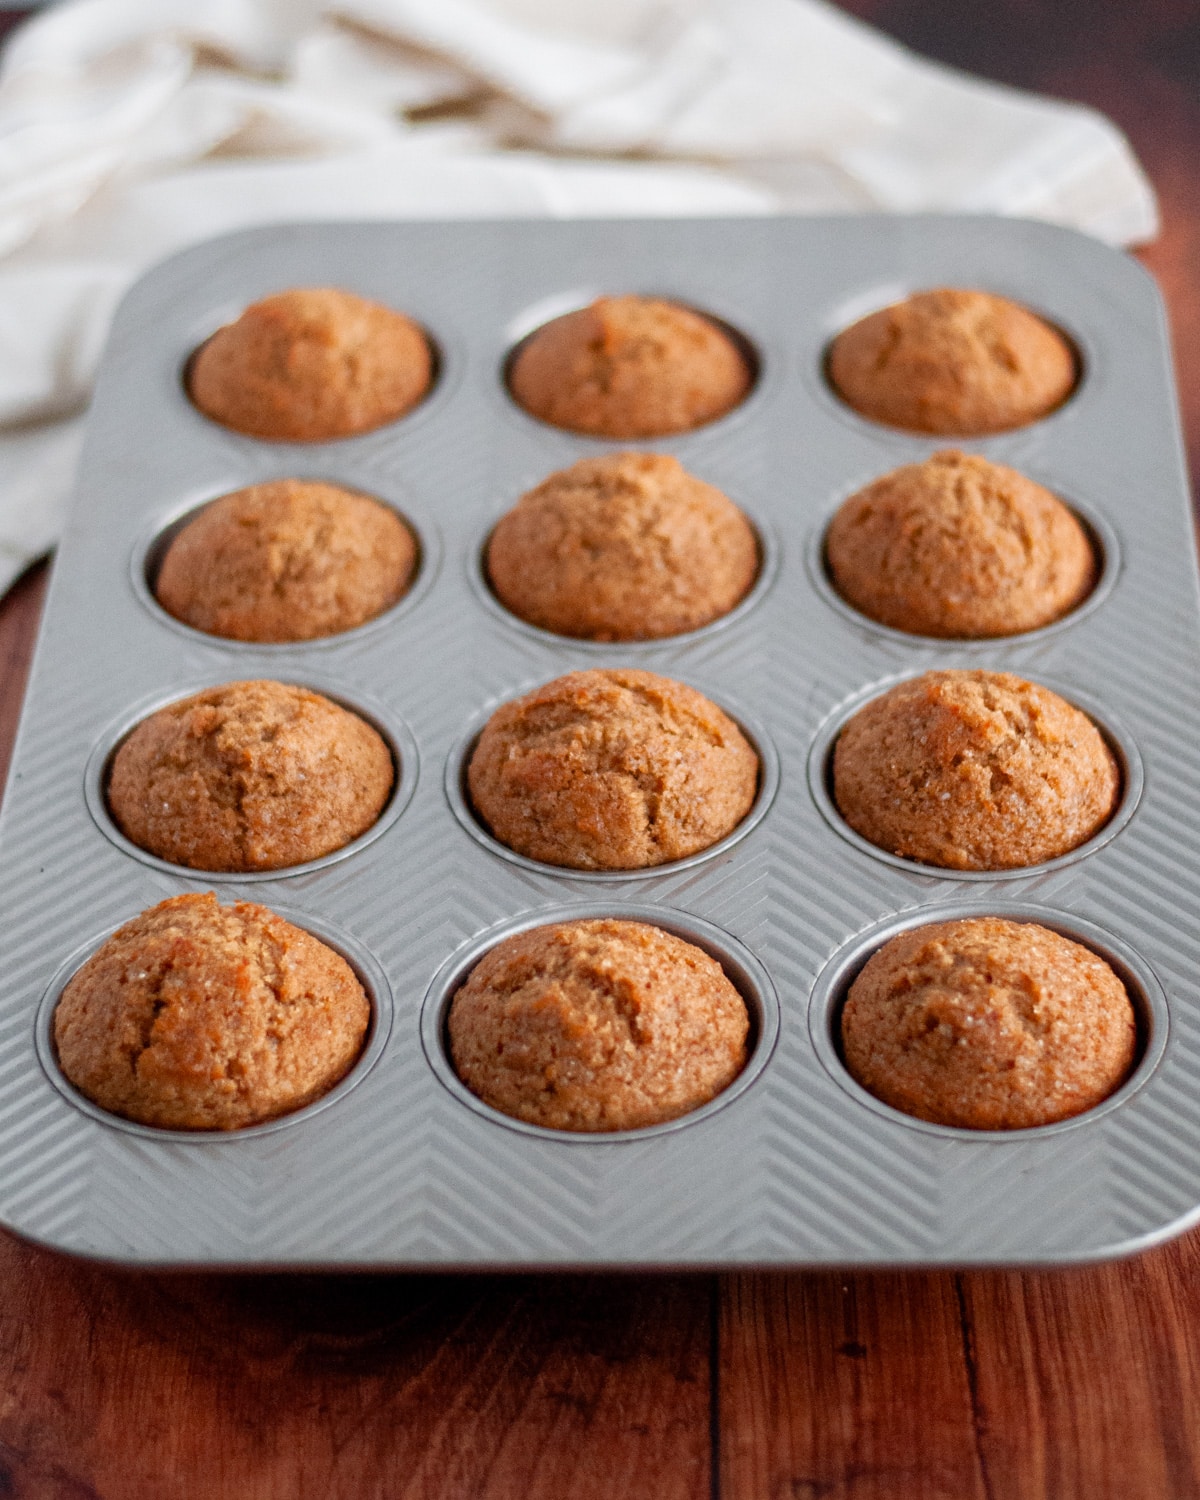 Process shot showing how to make wheat germ muffins; image shows perfectly browned and nicely domed muffins fresh out of the oven.